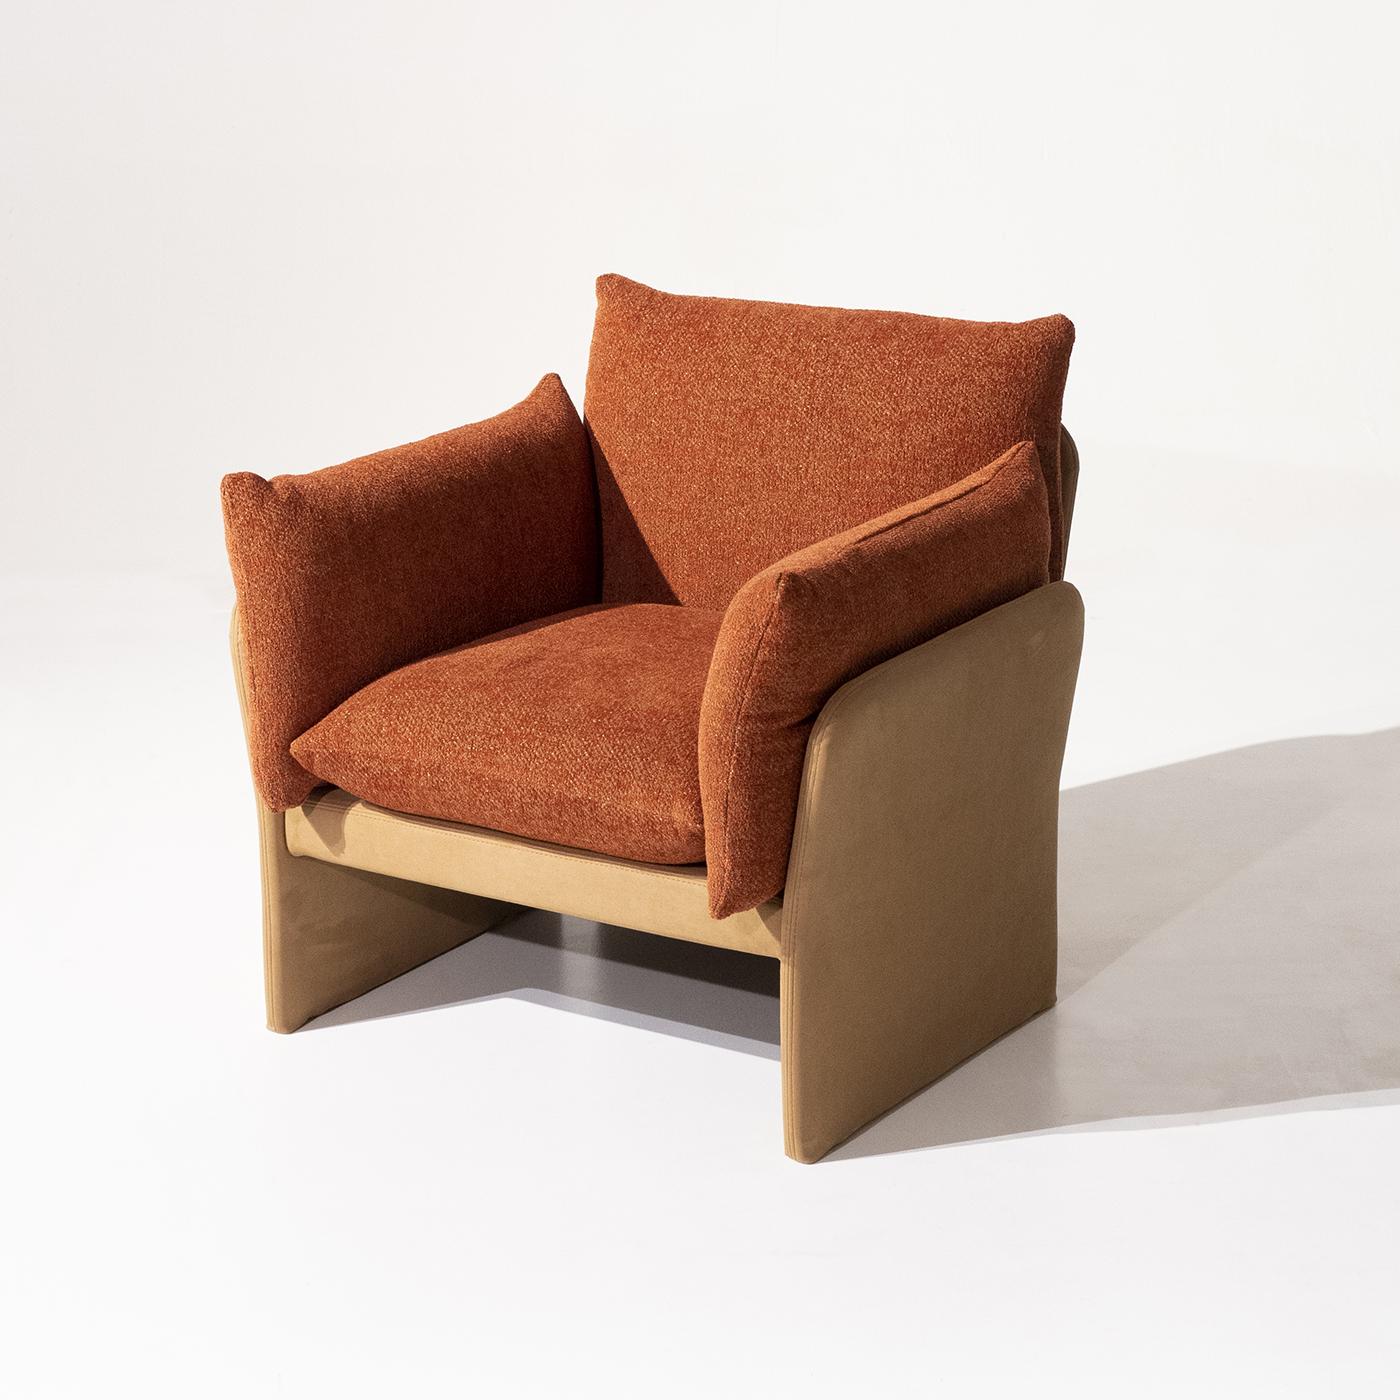 The Farfalle armchair is characterized by a simple yet sophisticated design. Centered around an inner metal frame, its unique construction is formed of three independent supporting pieces. On top sit a padded seat cushion, back rest and two